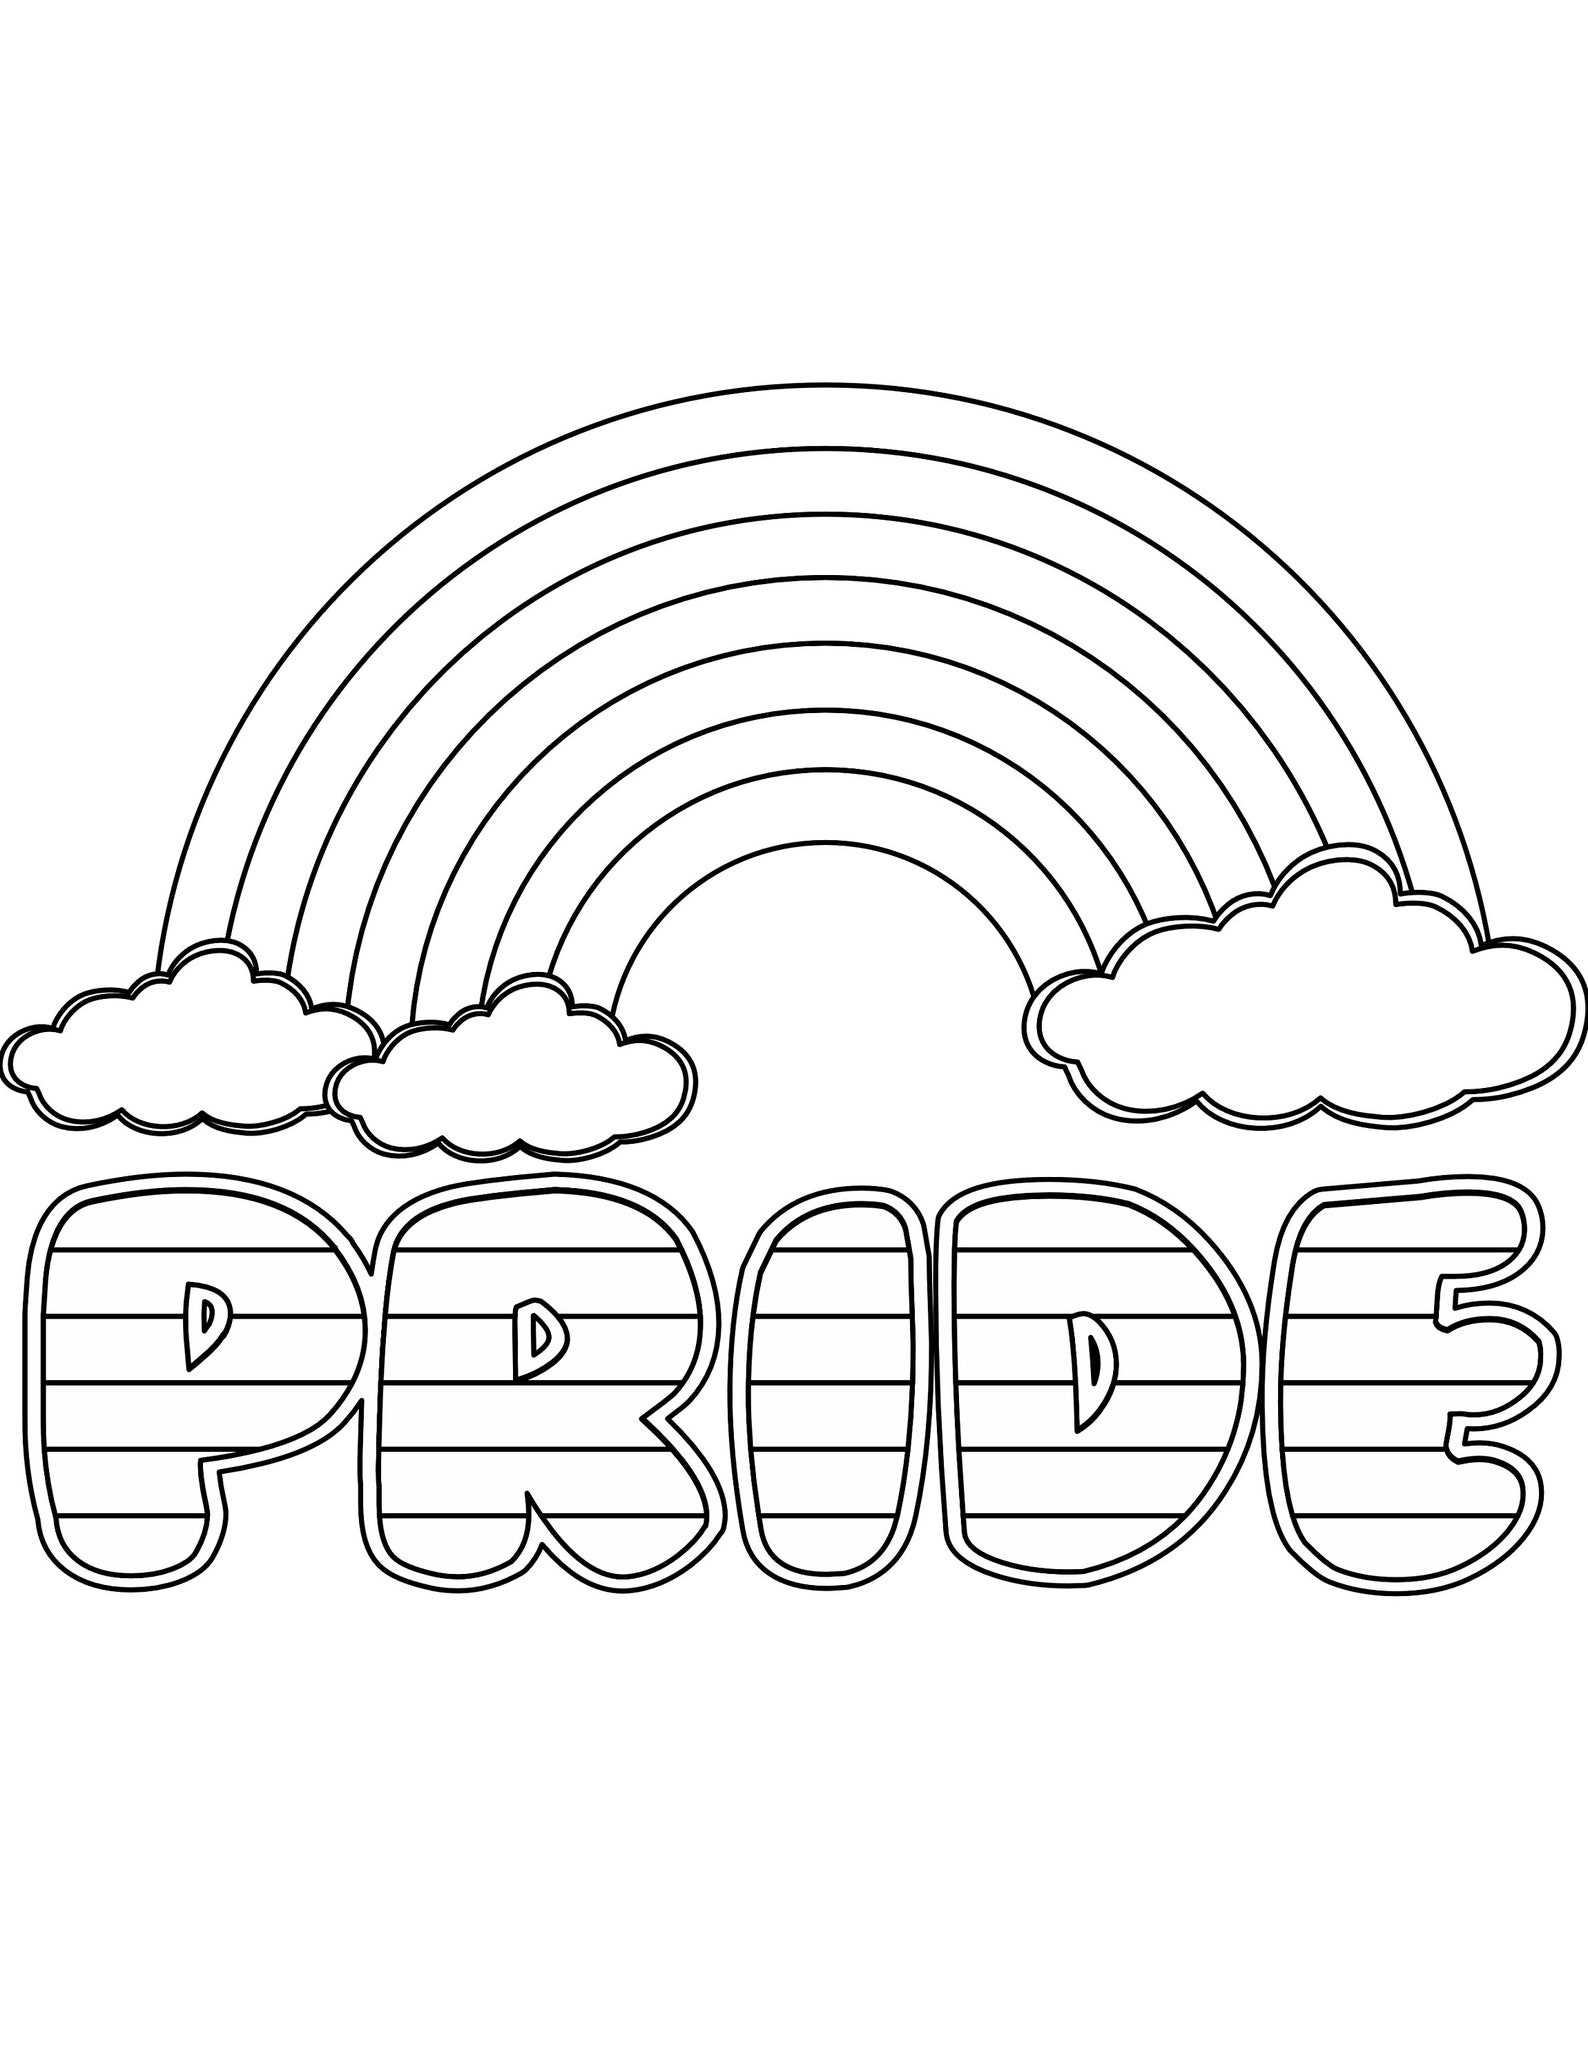 Pride Colouring Pages